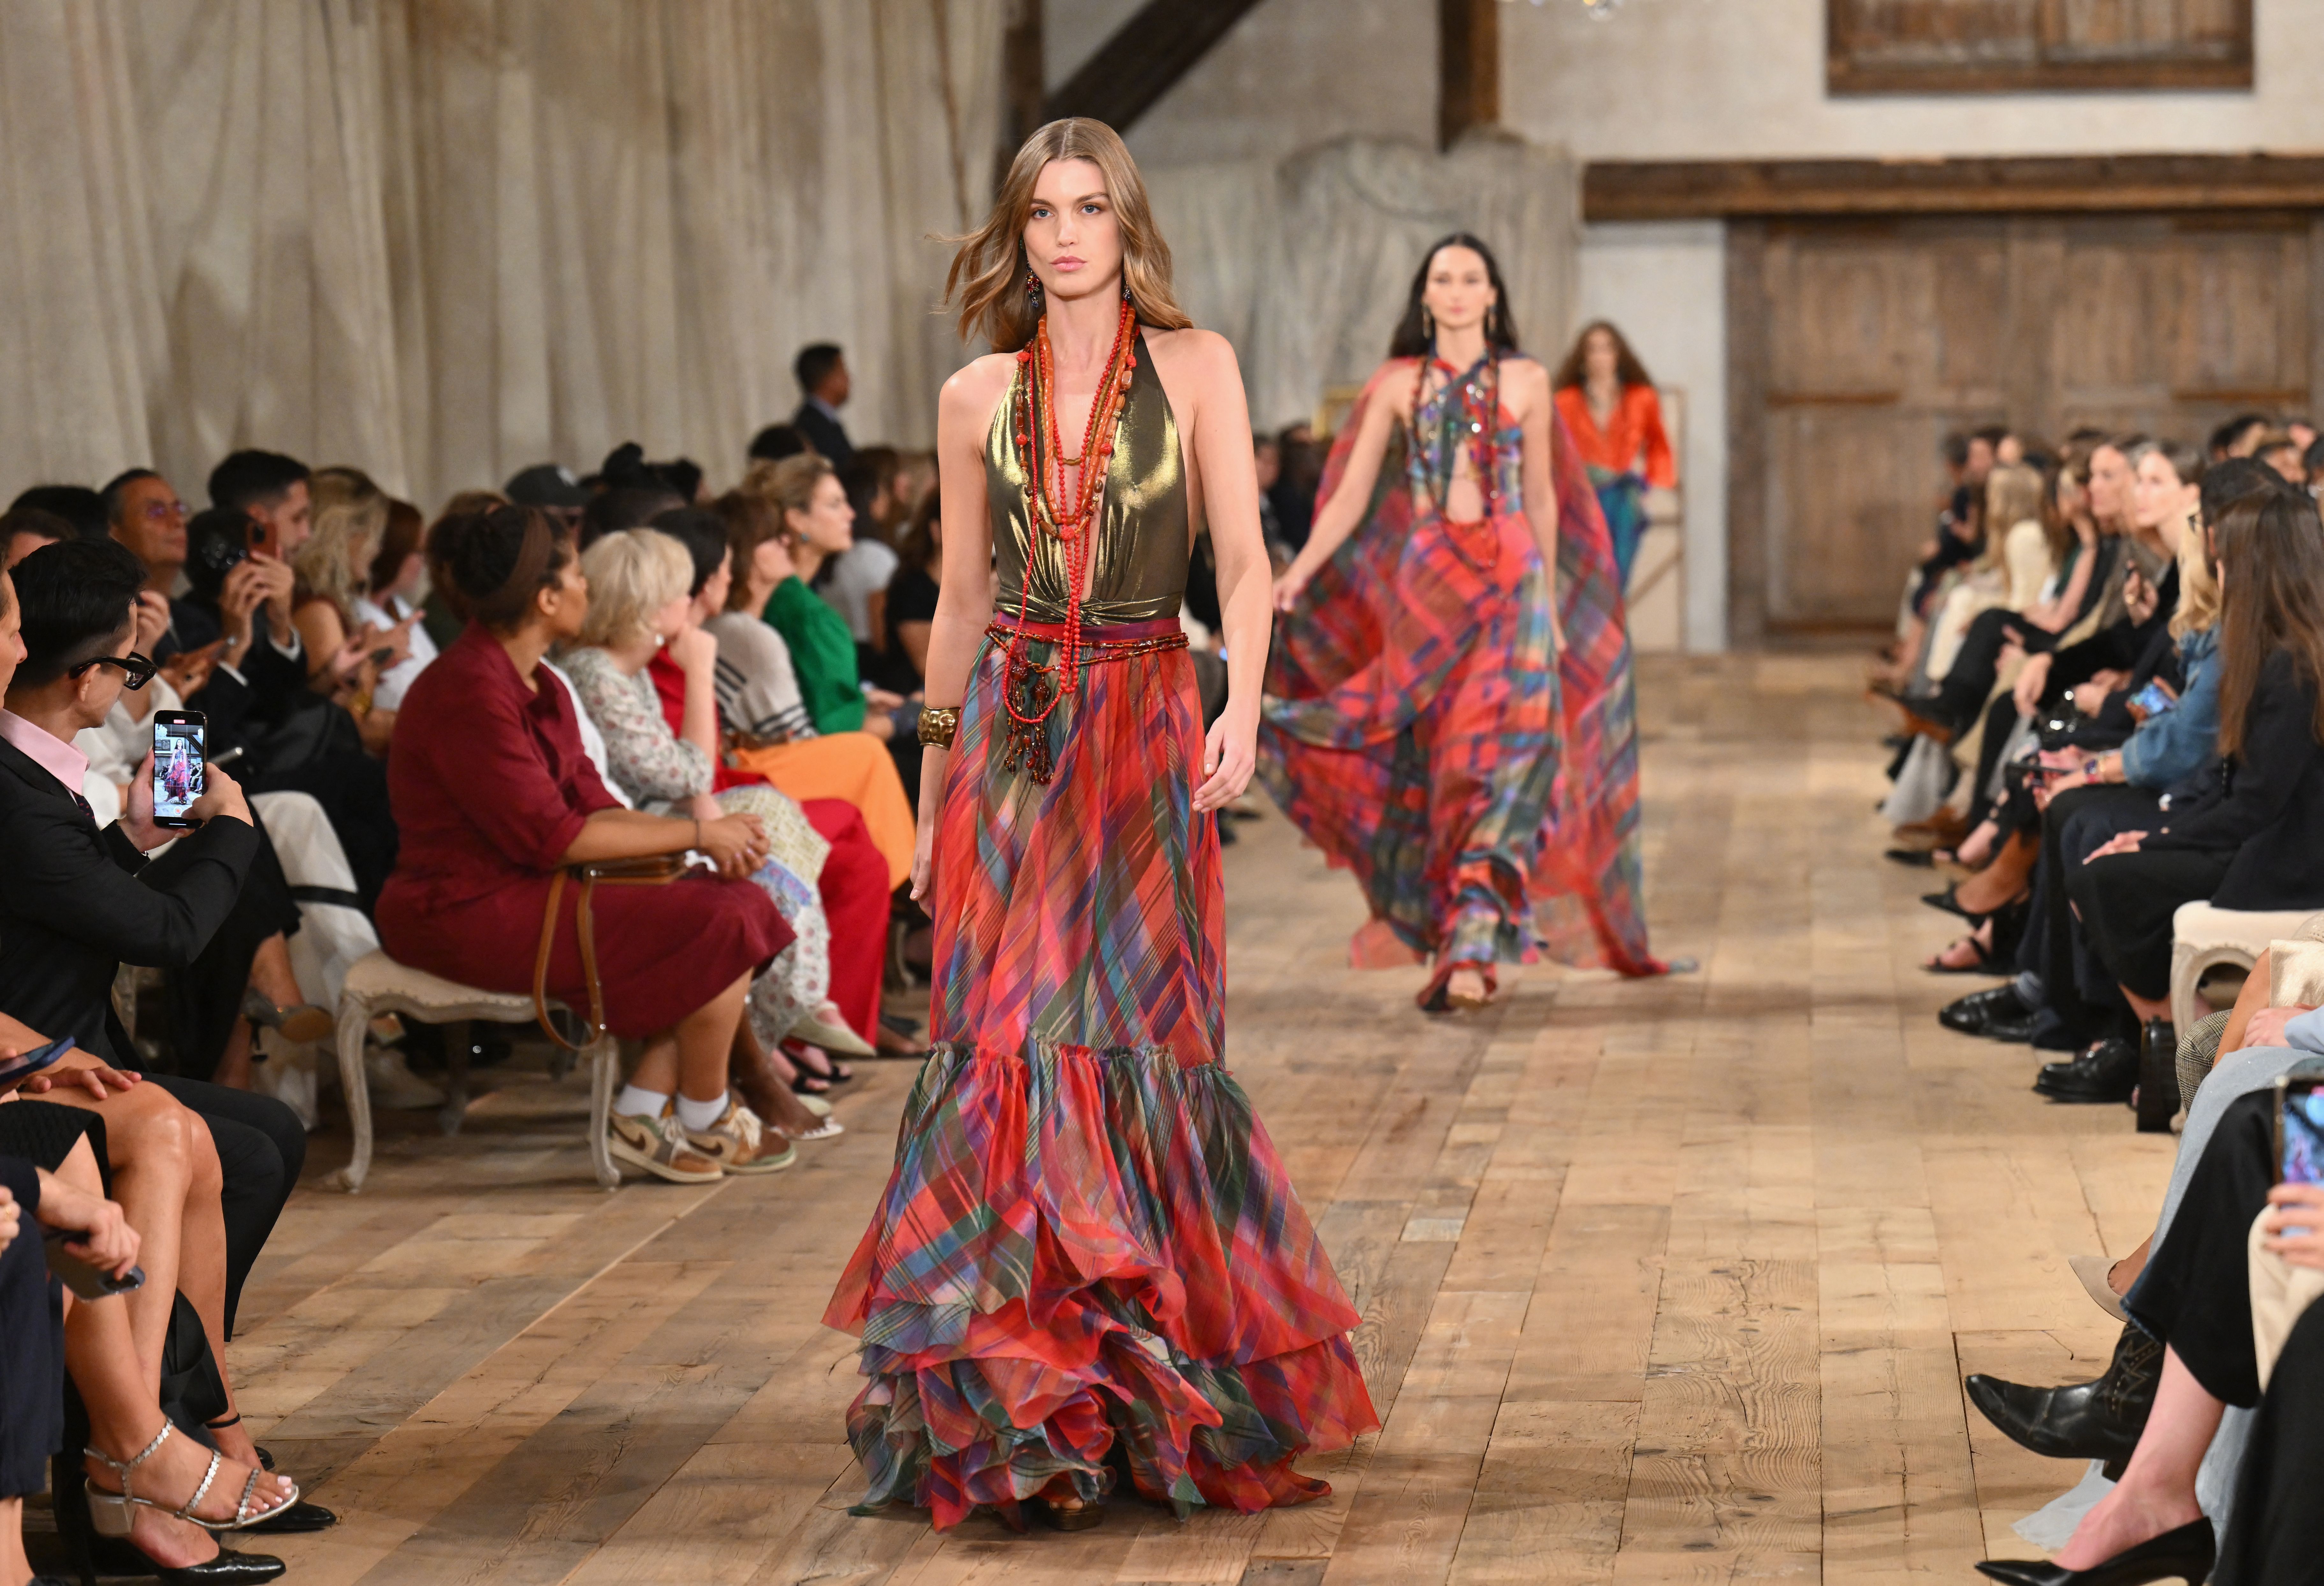 Ralph Lauren returns to runway after 2 years - Times of India